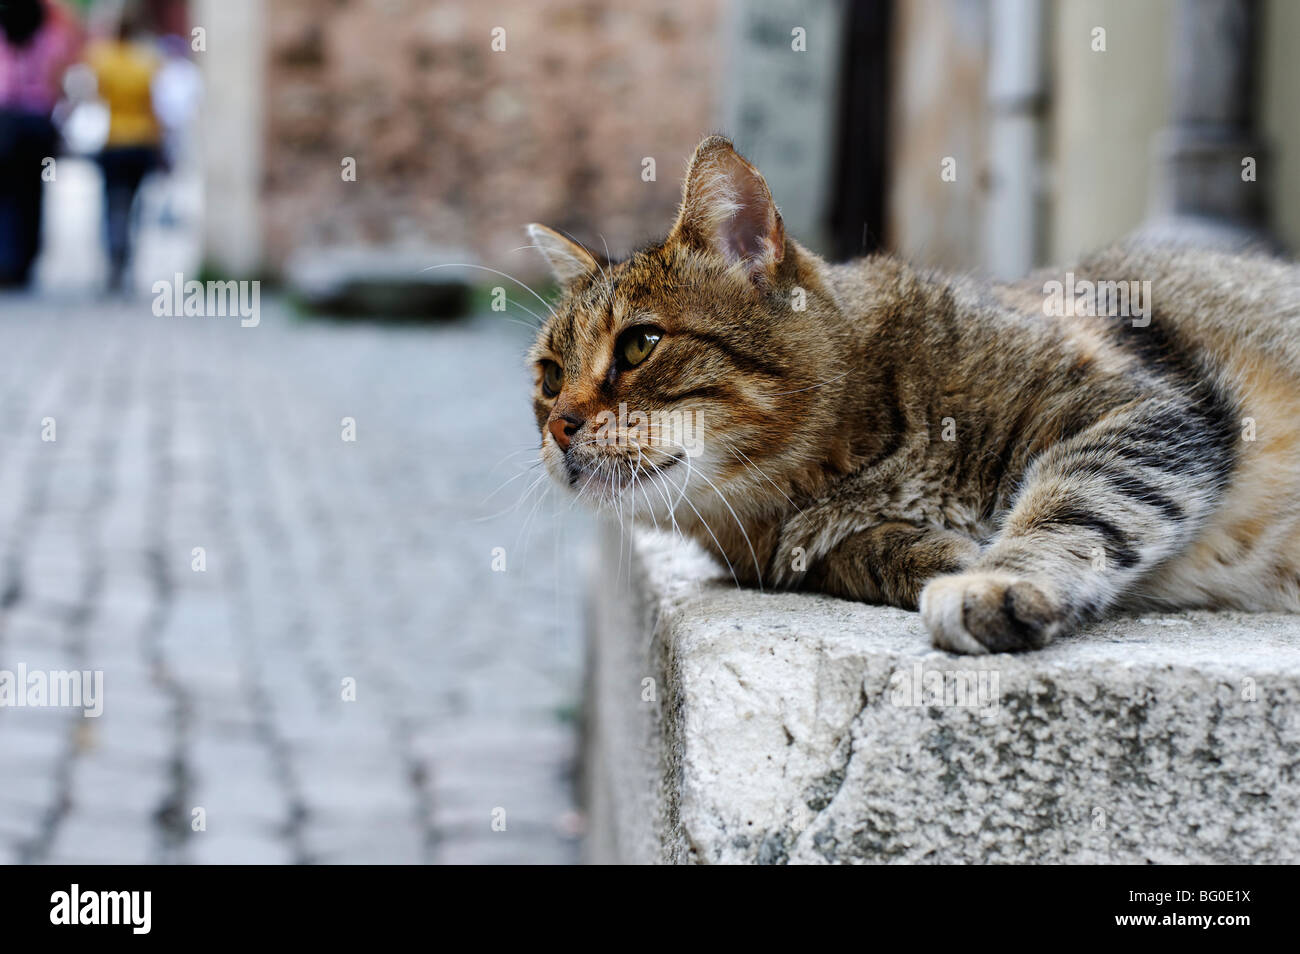 Lazy alley cat Stock Photo